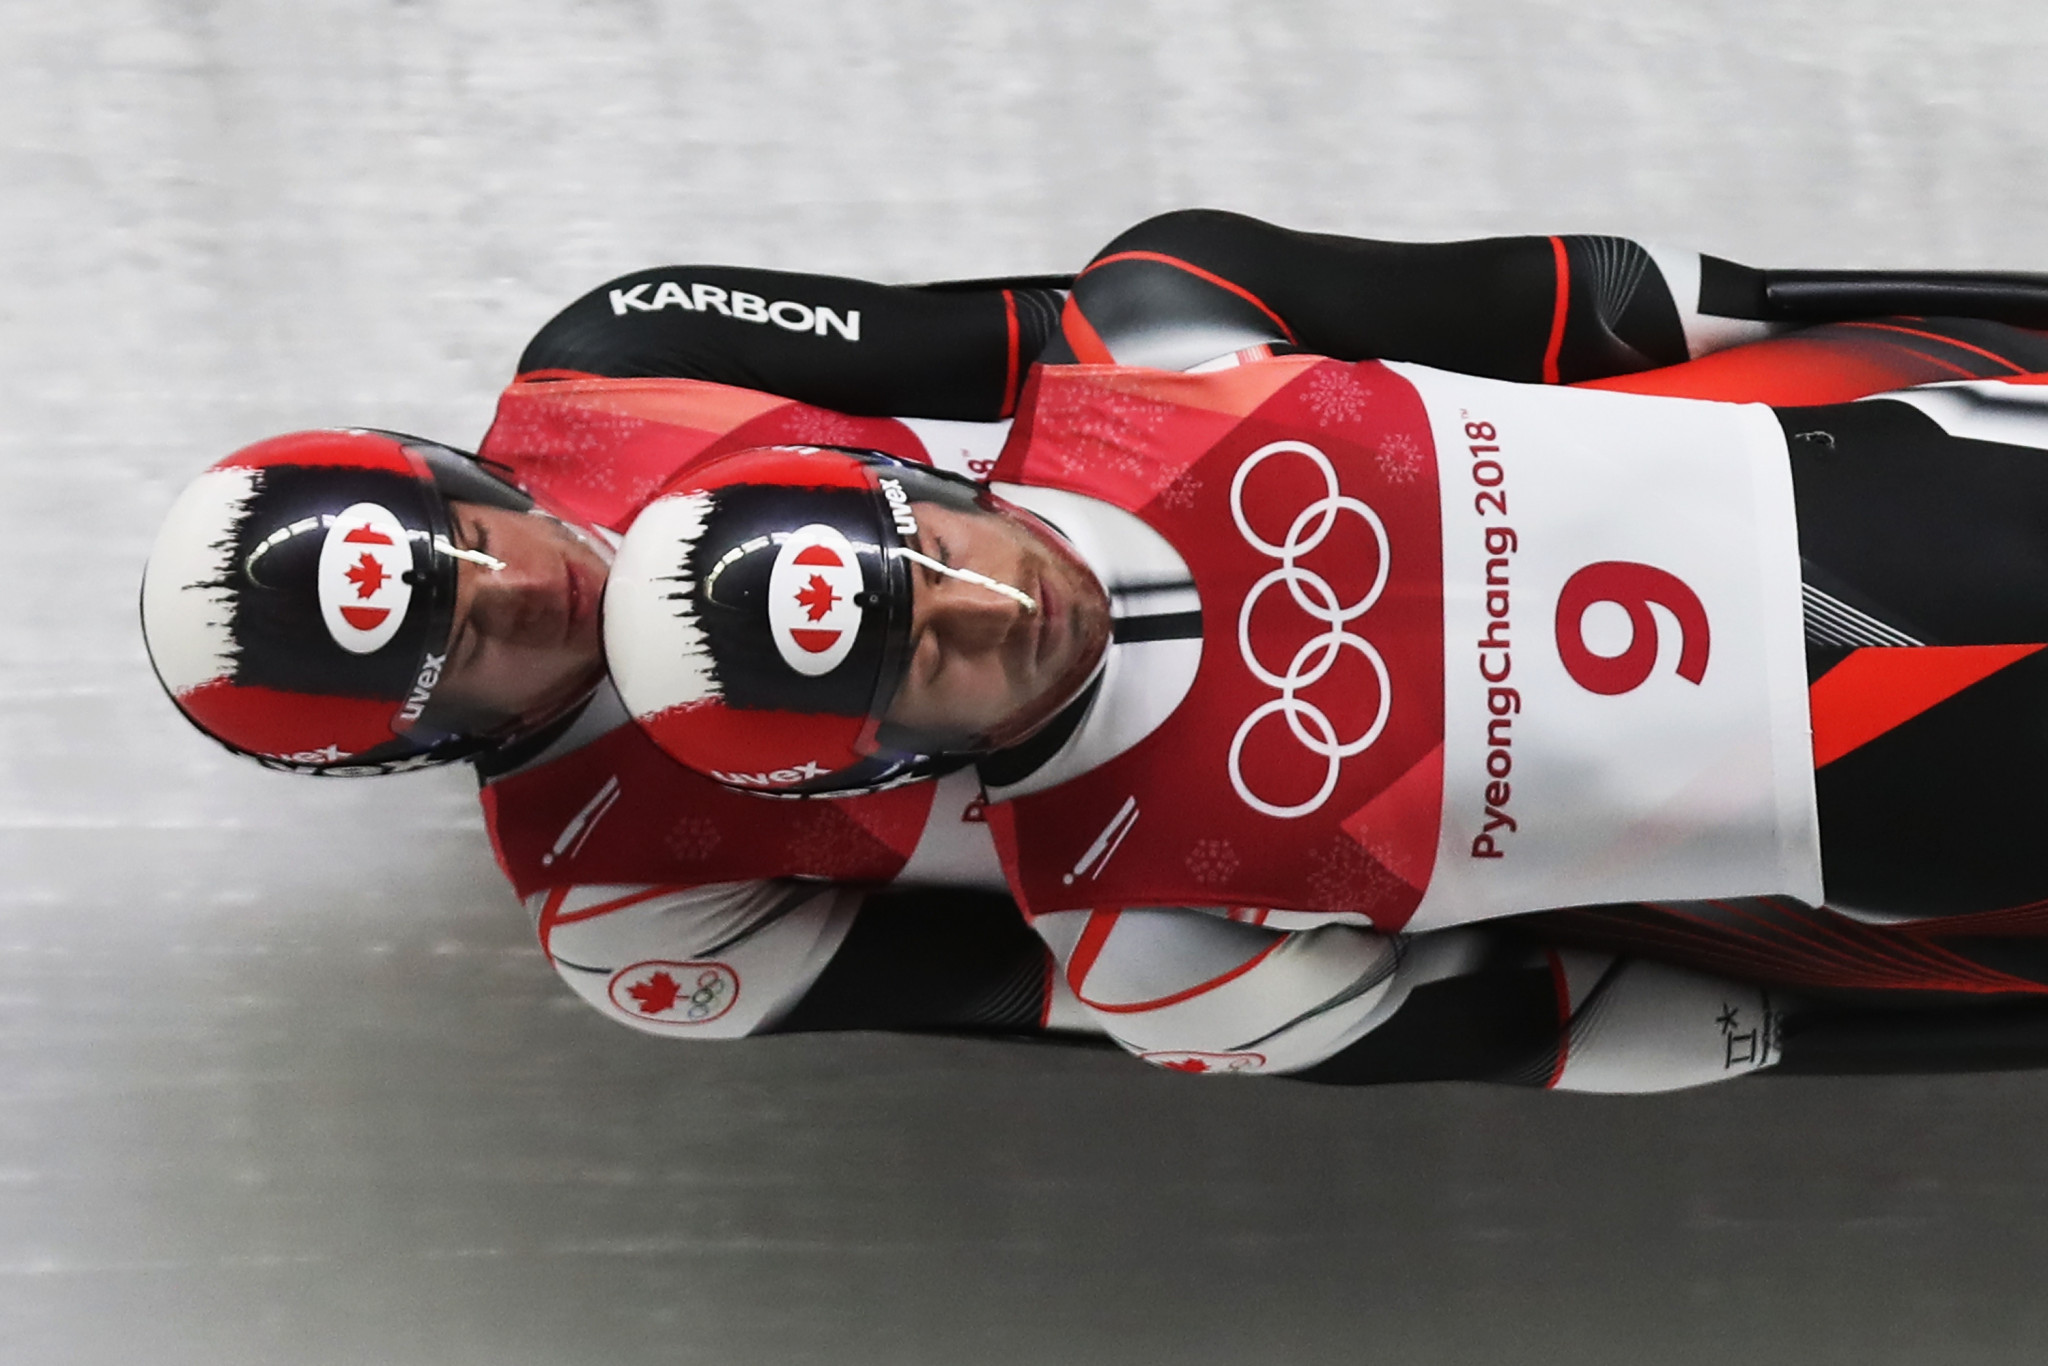 Canadian luge team to skip first four World Cup races over COVID-19 concerns